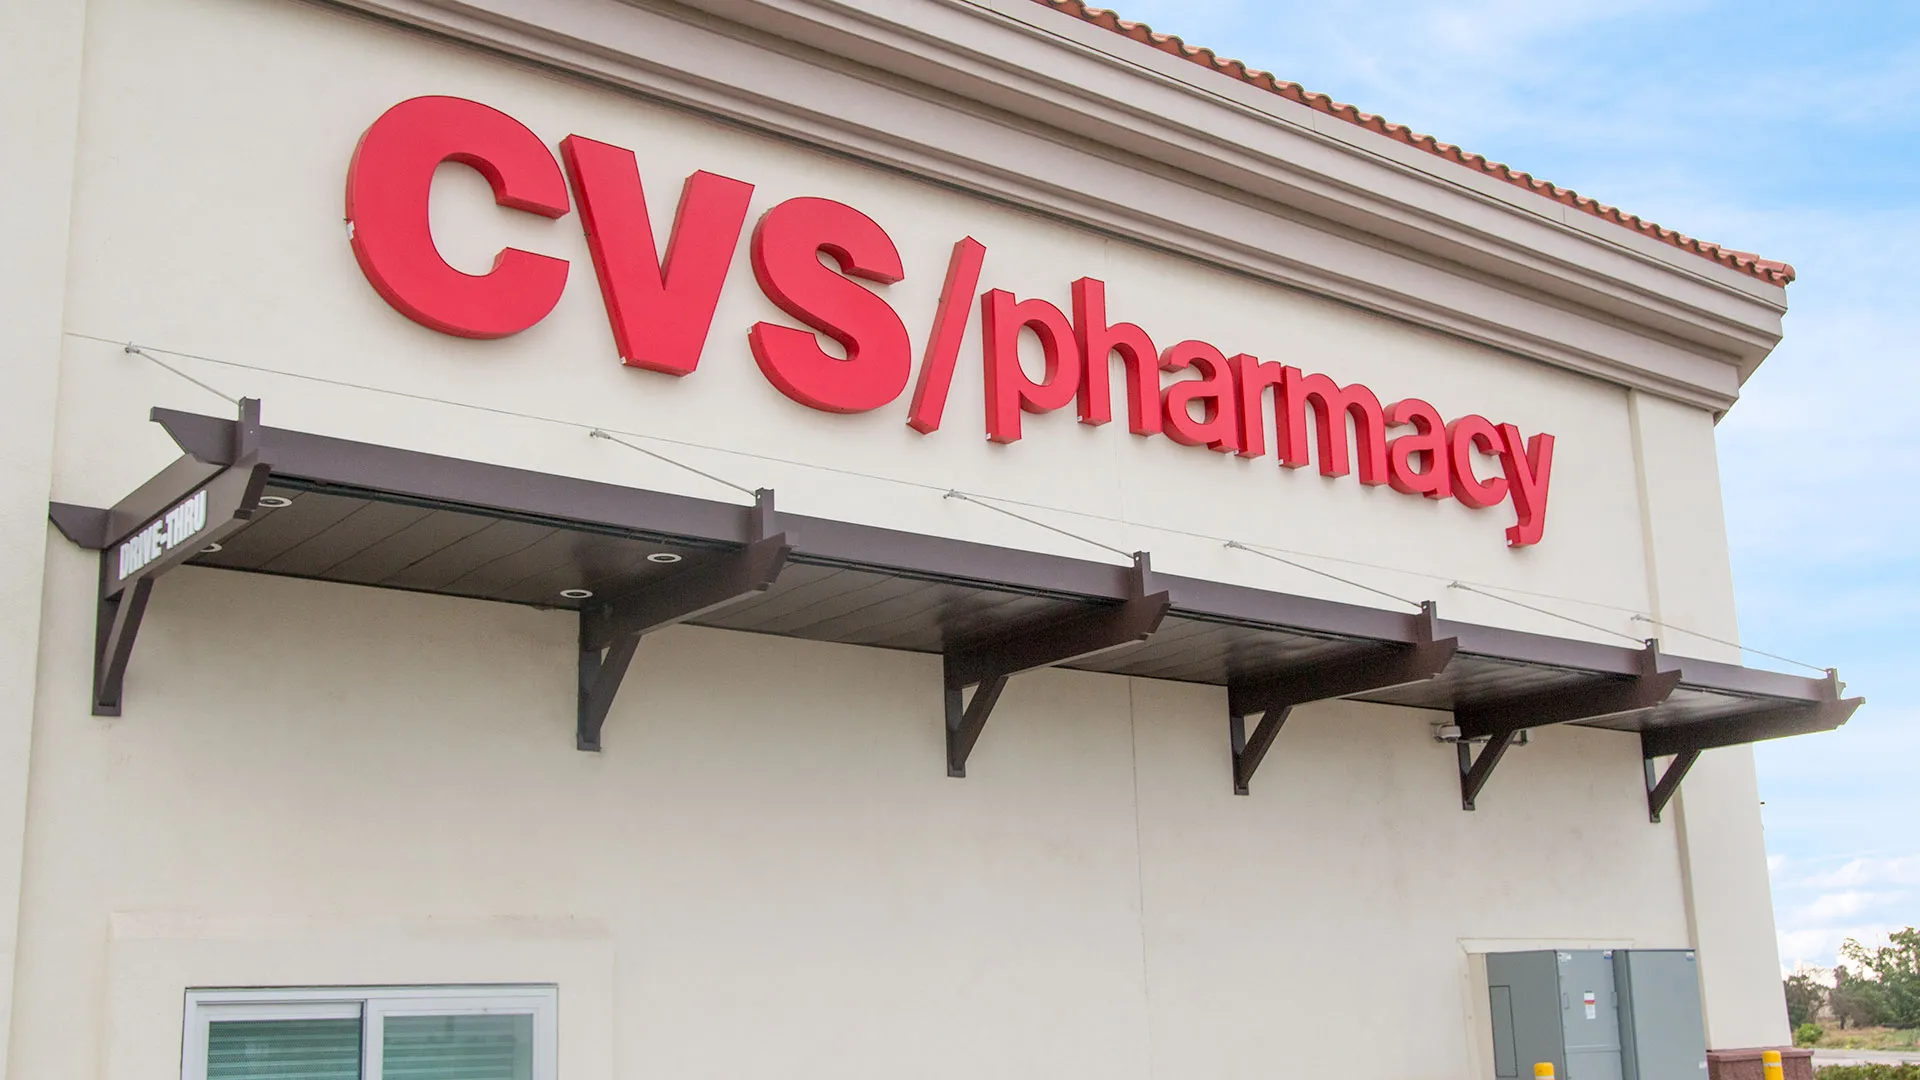 Featured image for “CVS Pharmacy: Custom Trex Wall Pergola Kits”Project Overview: R3 Builders, Inc. worked with CVS Pharmacy in Livingston, California to add seven, custom, Trex Wall Pergolas to enhance the building’s architectural appeal13124:full